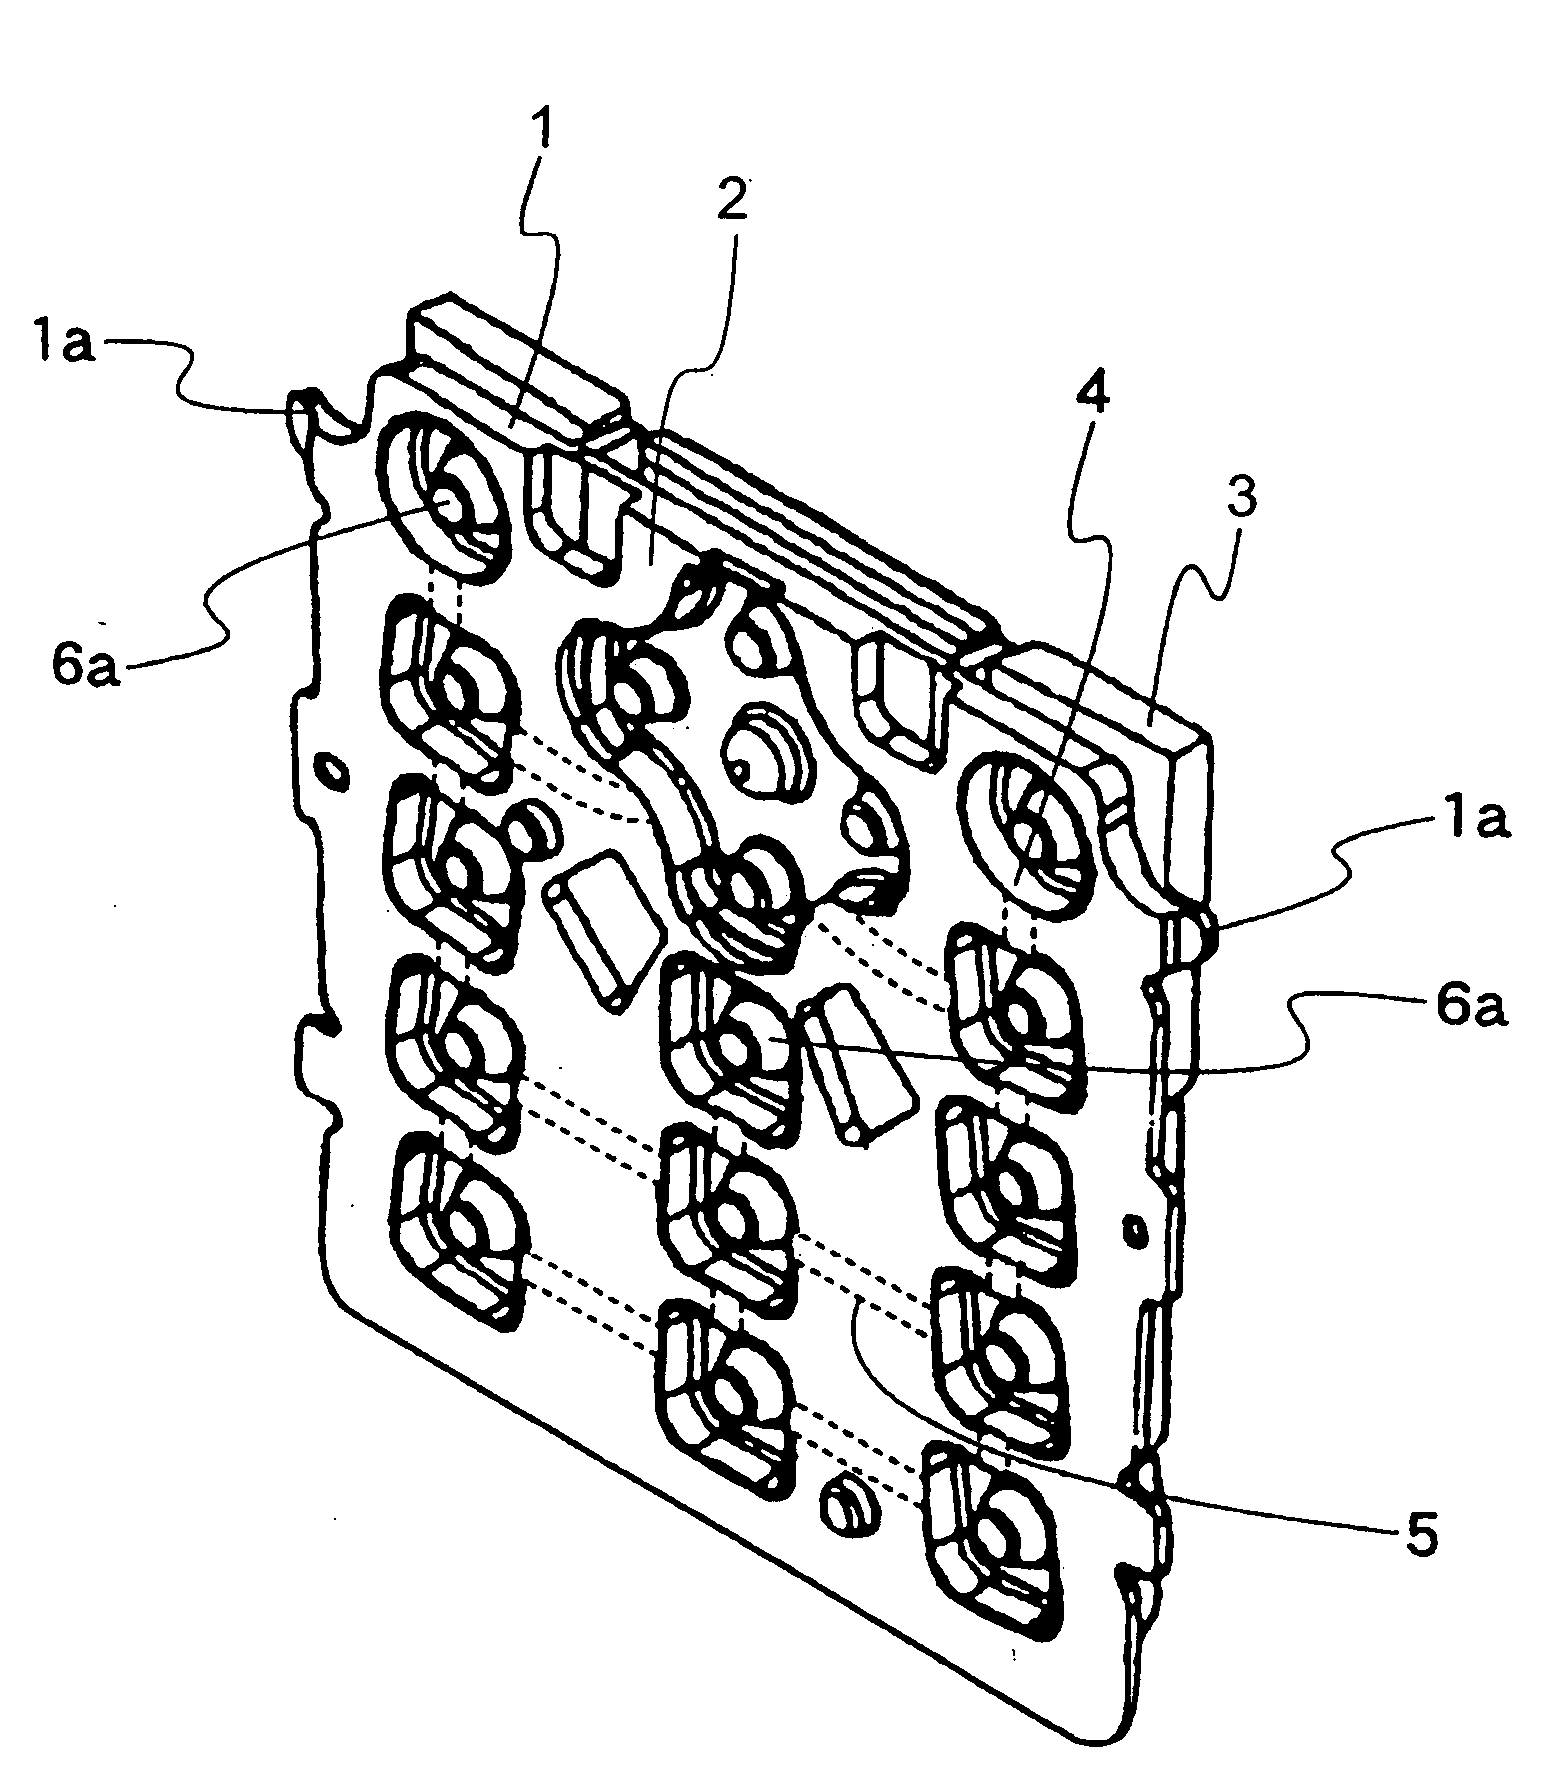 Cover Member For Push-Button Switch And Method Of Manufacturing The Same